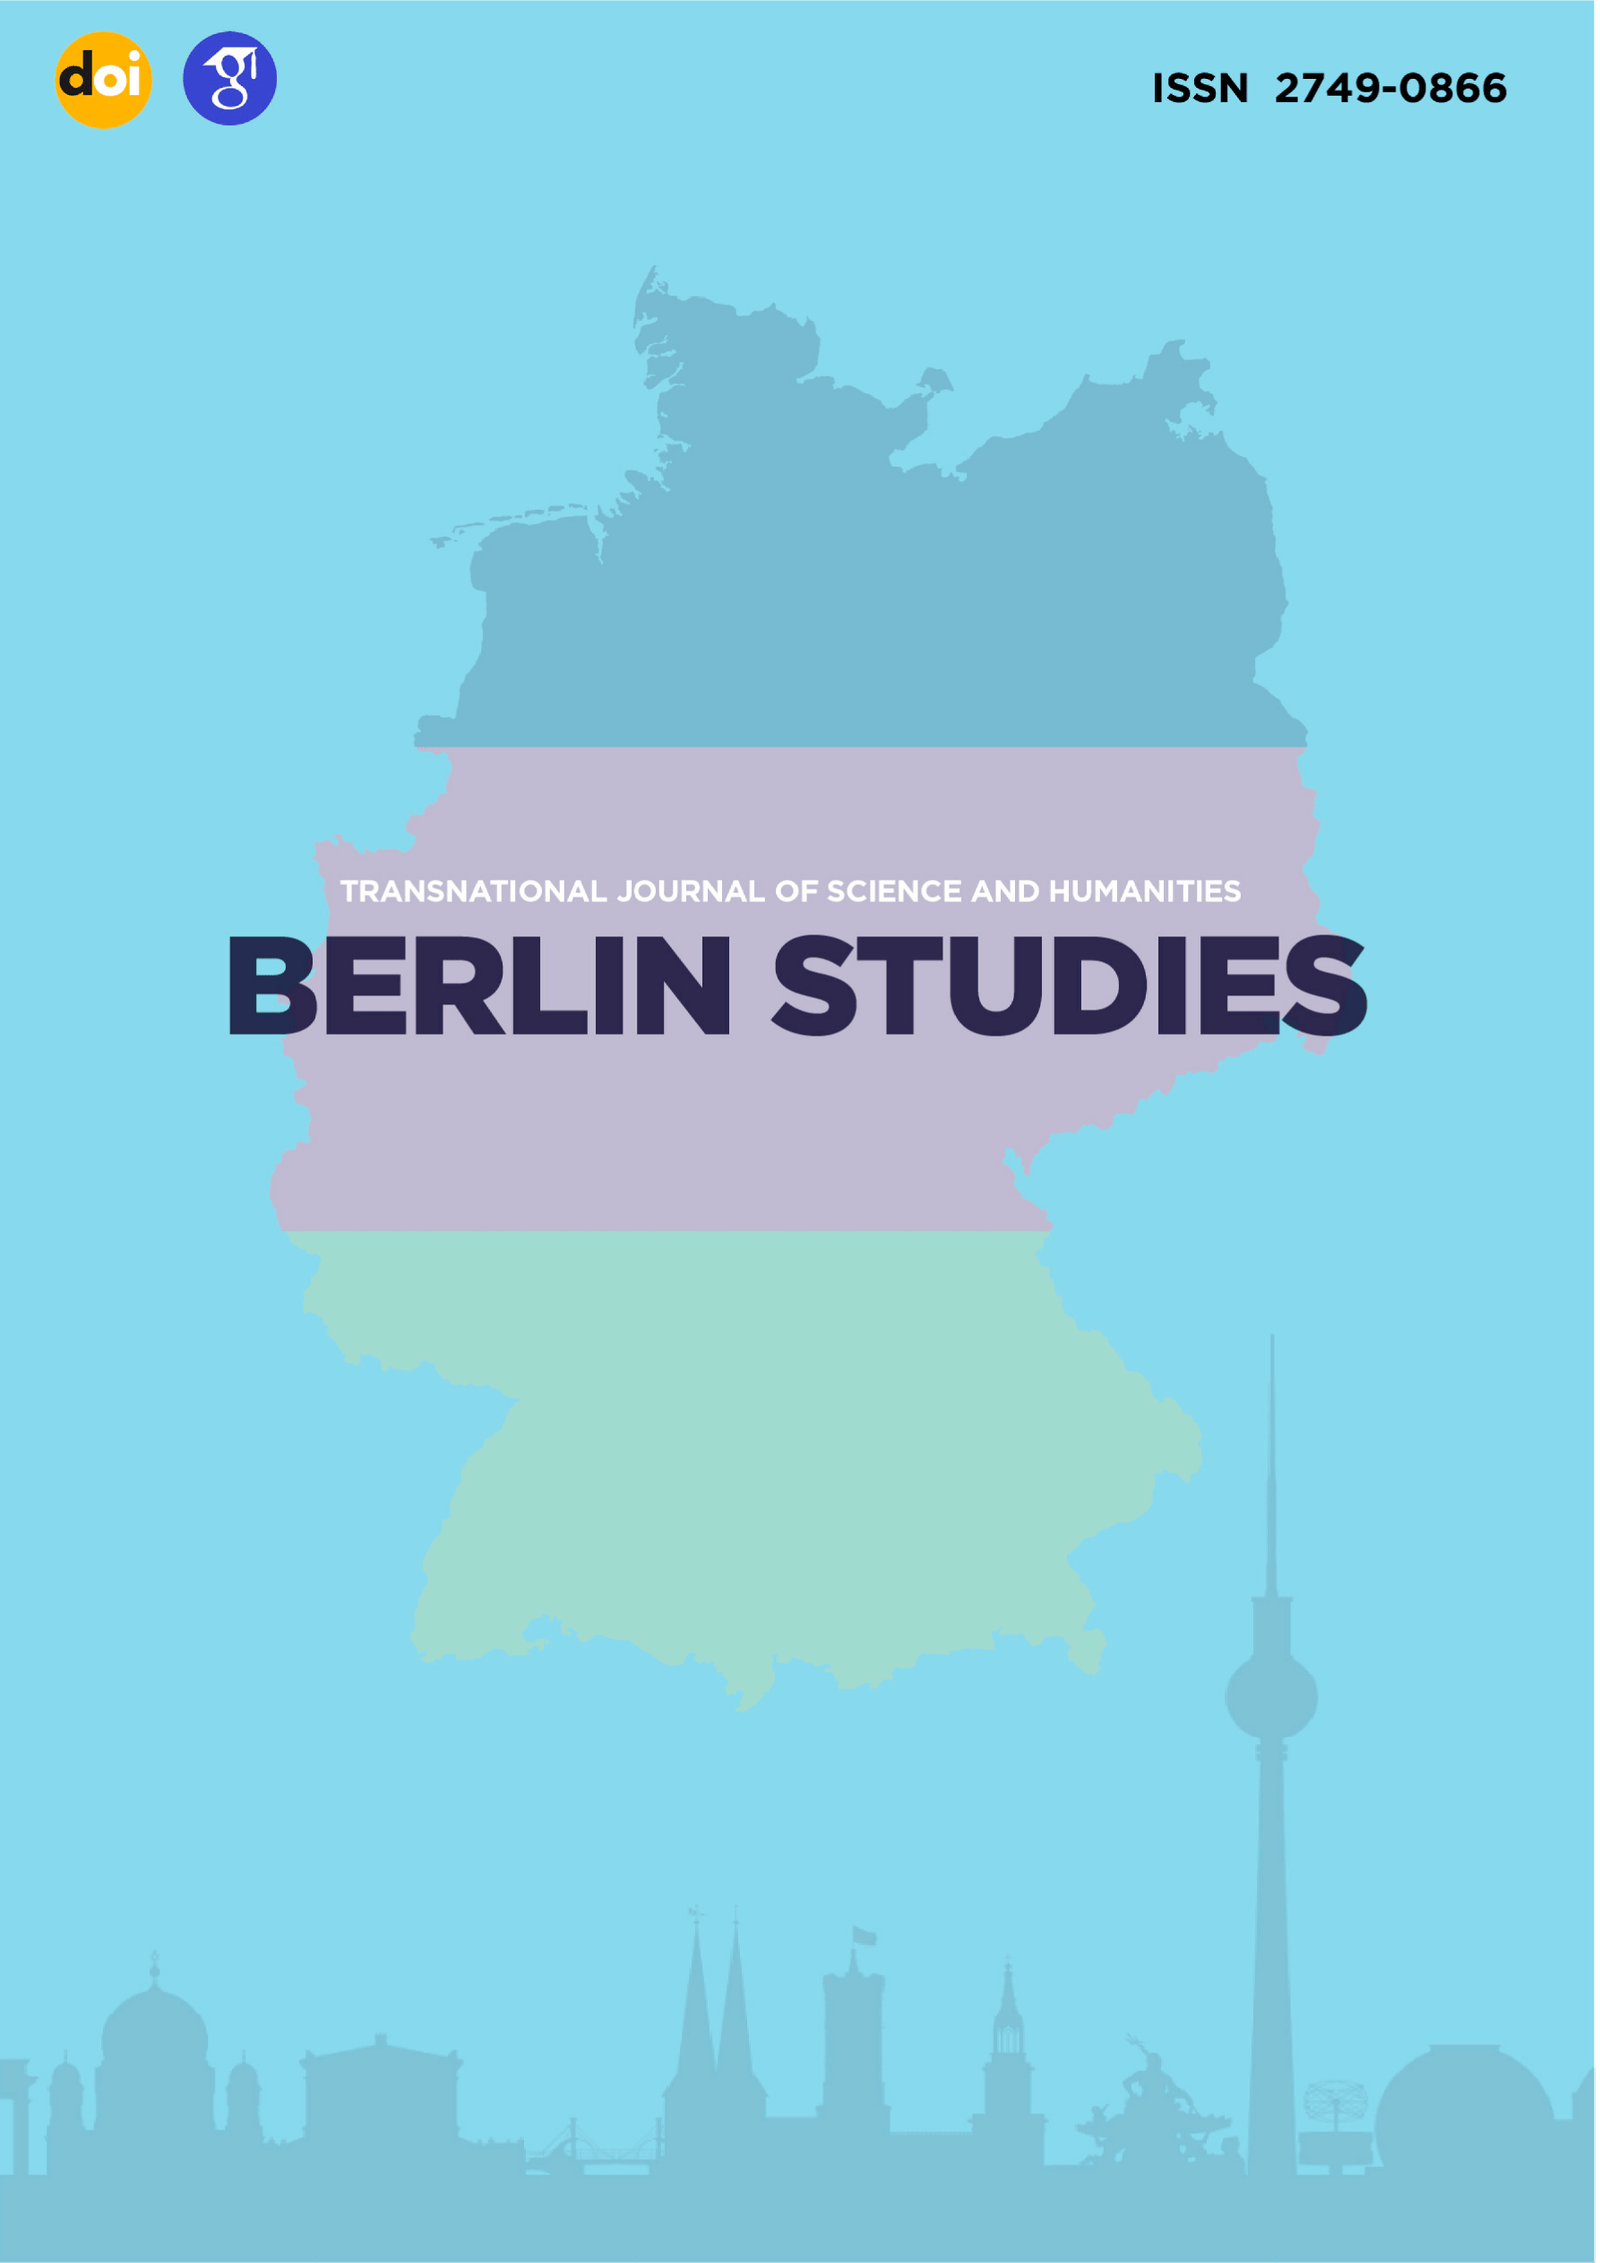 					View Vol. 1 No. 1.10 Sociological sciences (2021): Berlin Studies Transnational Journal of Science and Humanities
				